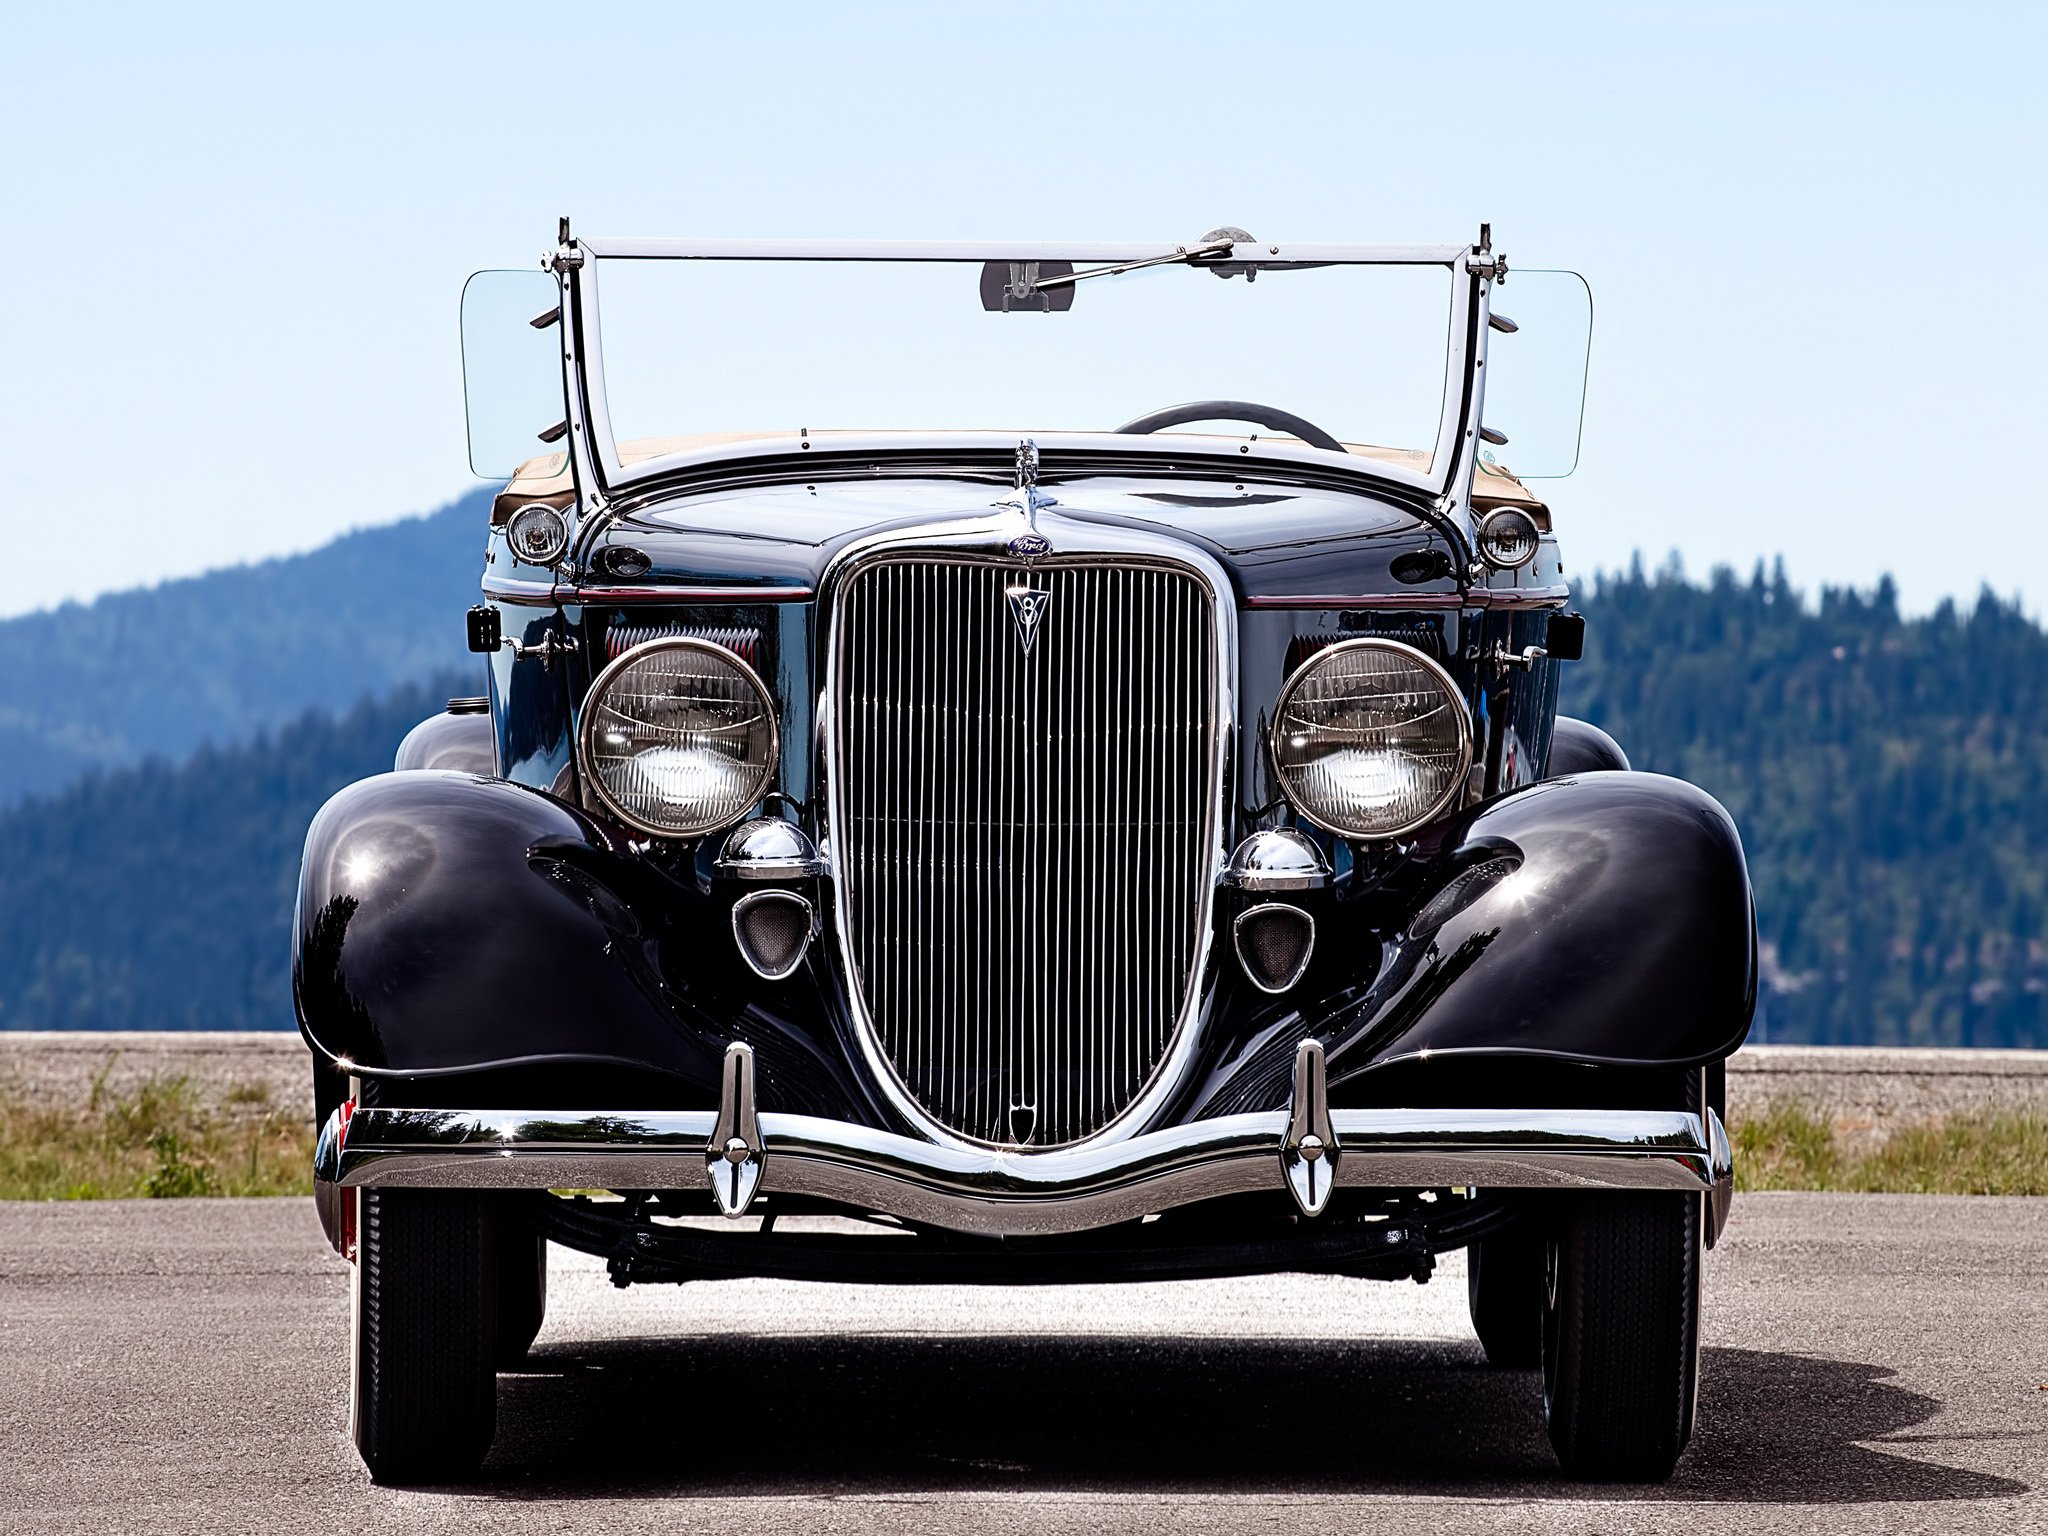 1934 Ford DeLuxe Roadster Backgrounds, Compatible - PC, Mobile, Gadgets| 2048x1536 px